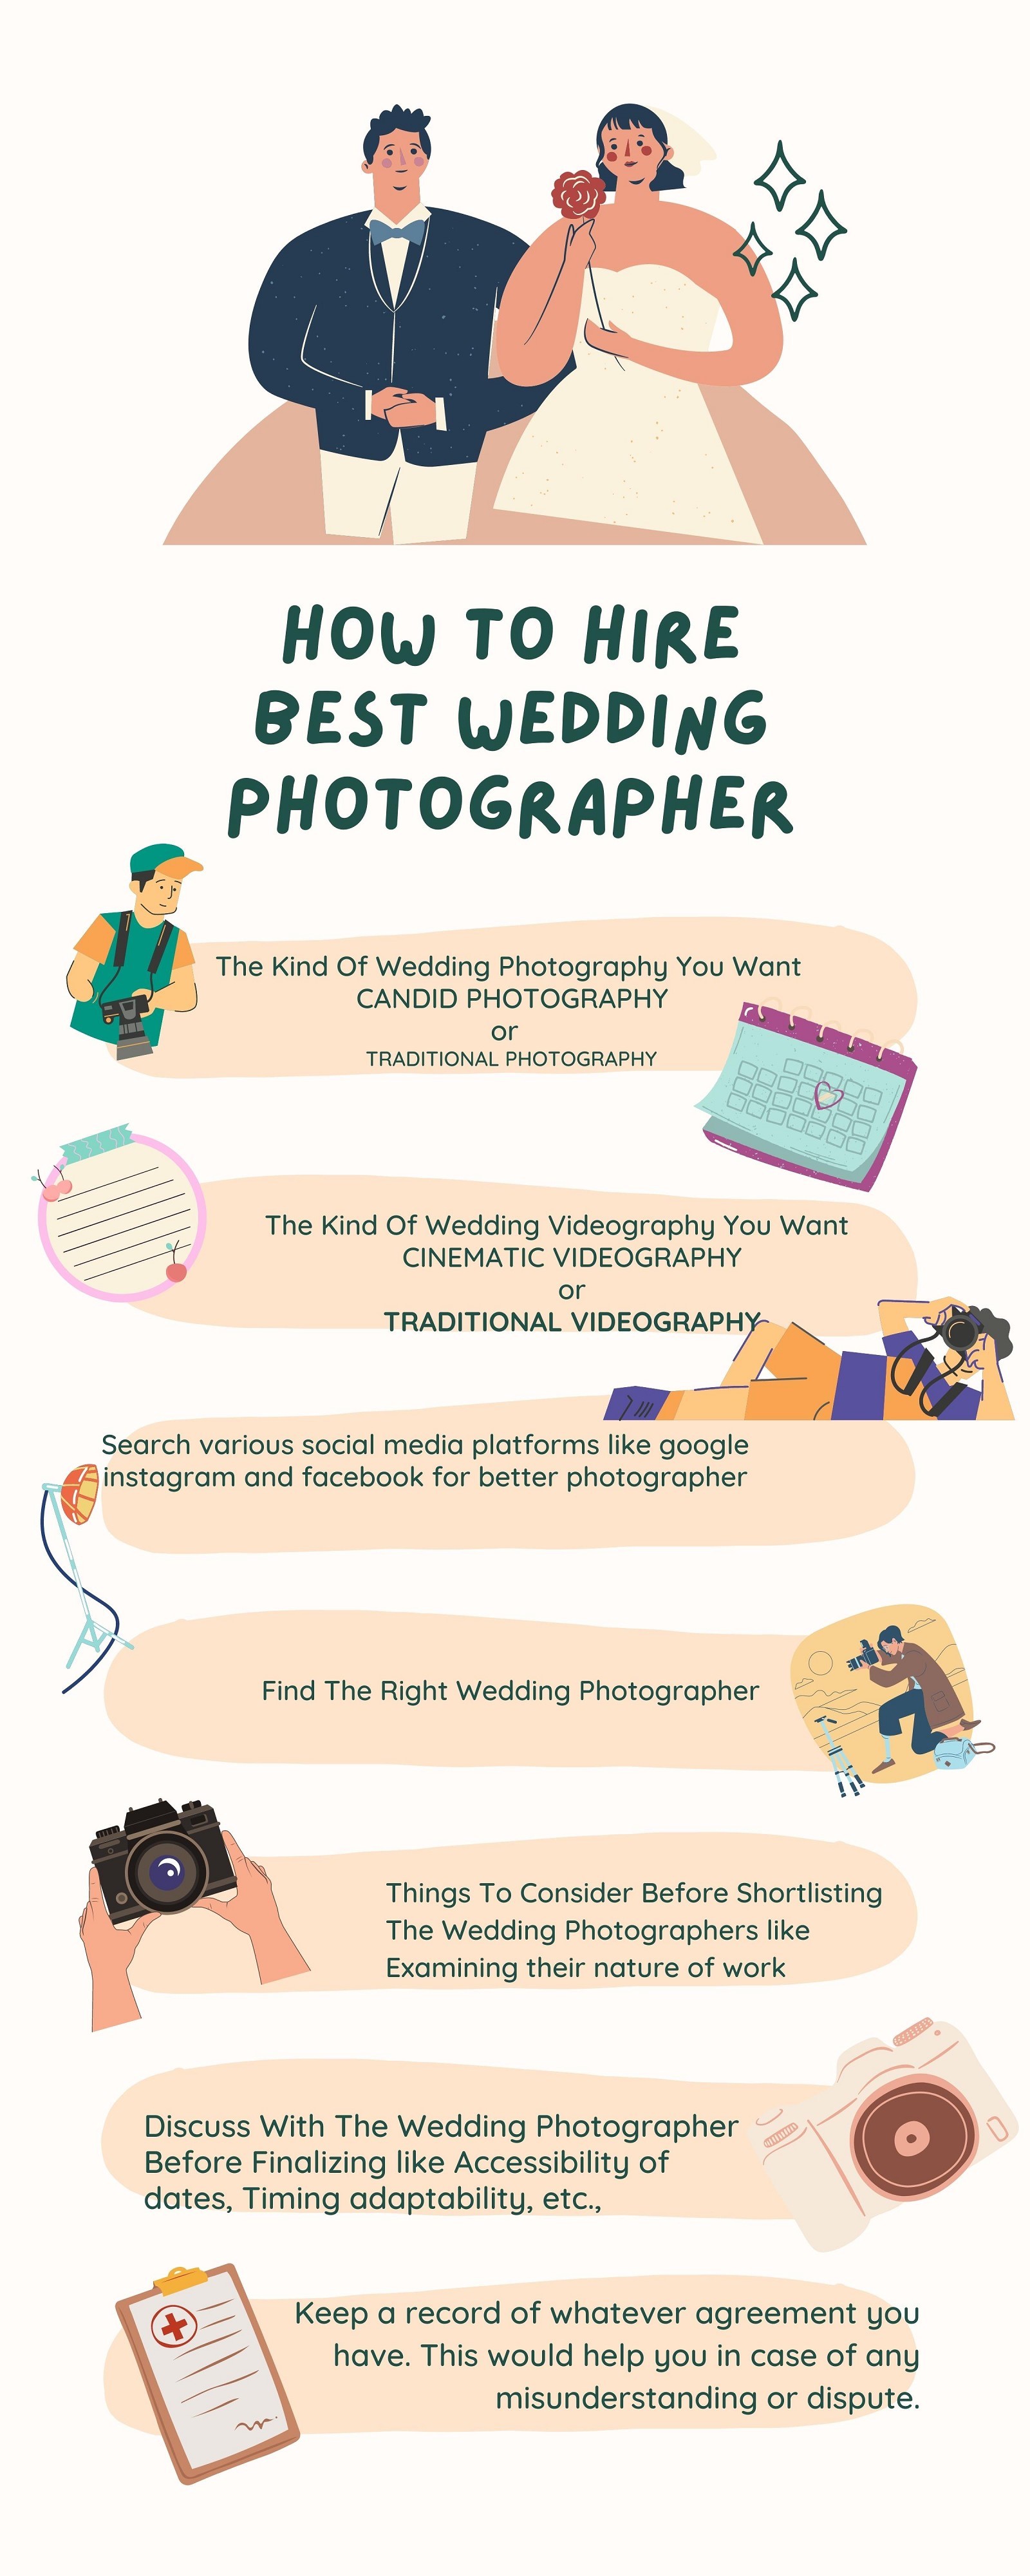 How to hire best wedding photographer